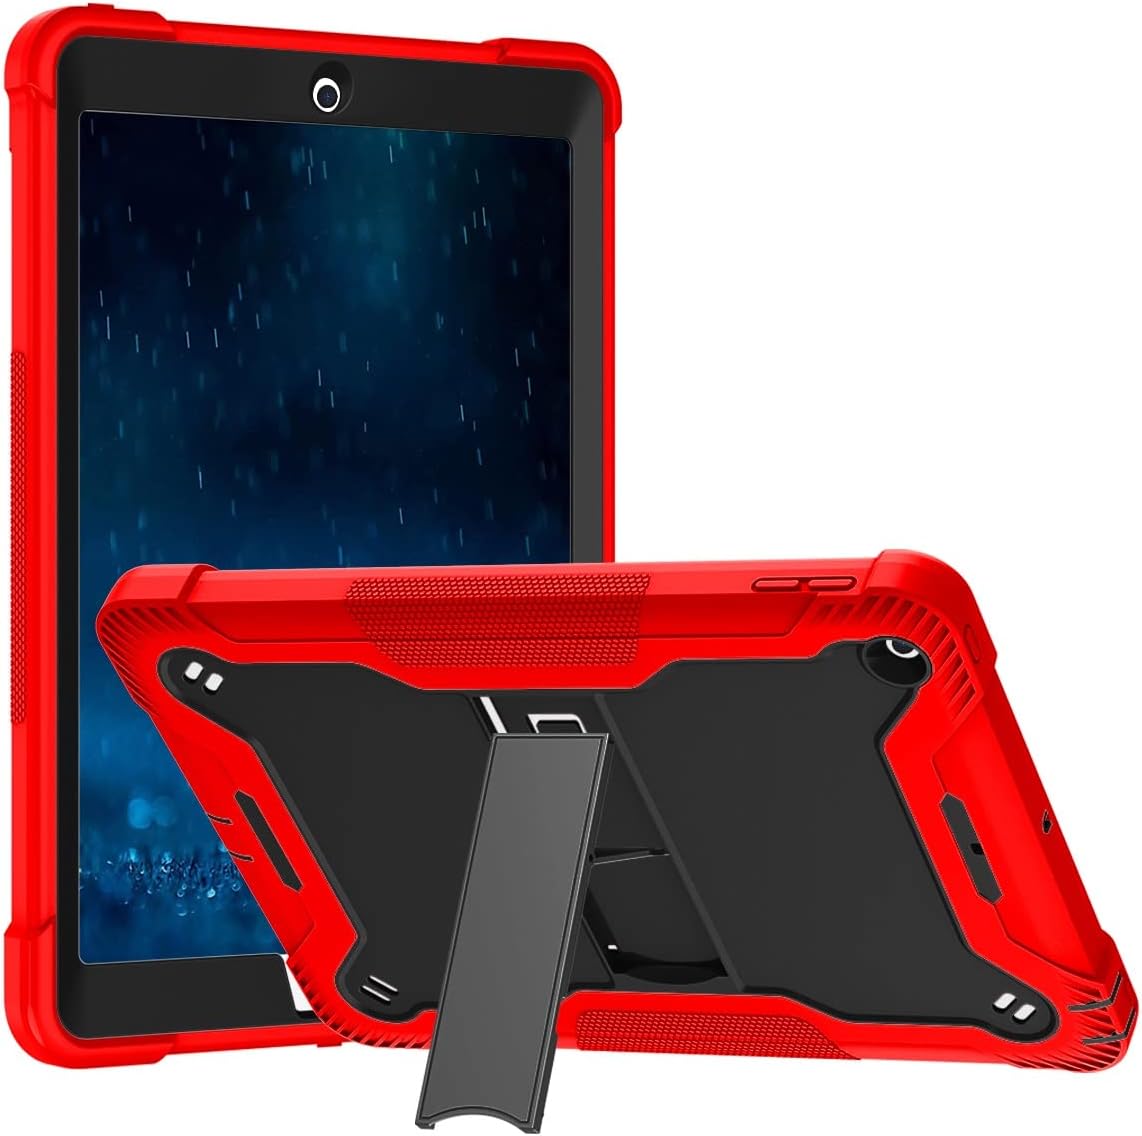 Apple iPad 5, 6, Air 2 (9.7 inch) Hot Pink Shockproof Rugged Case with Kickstand